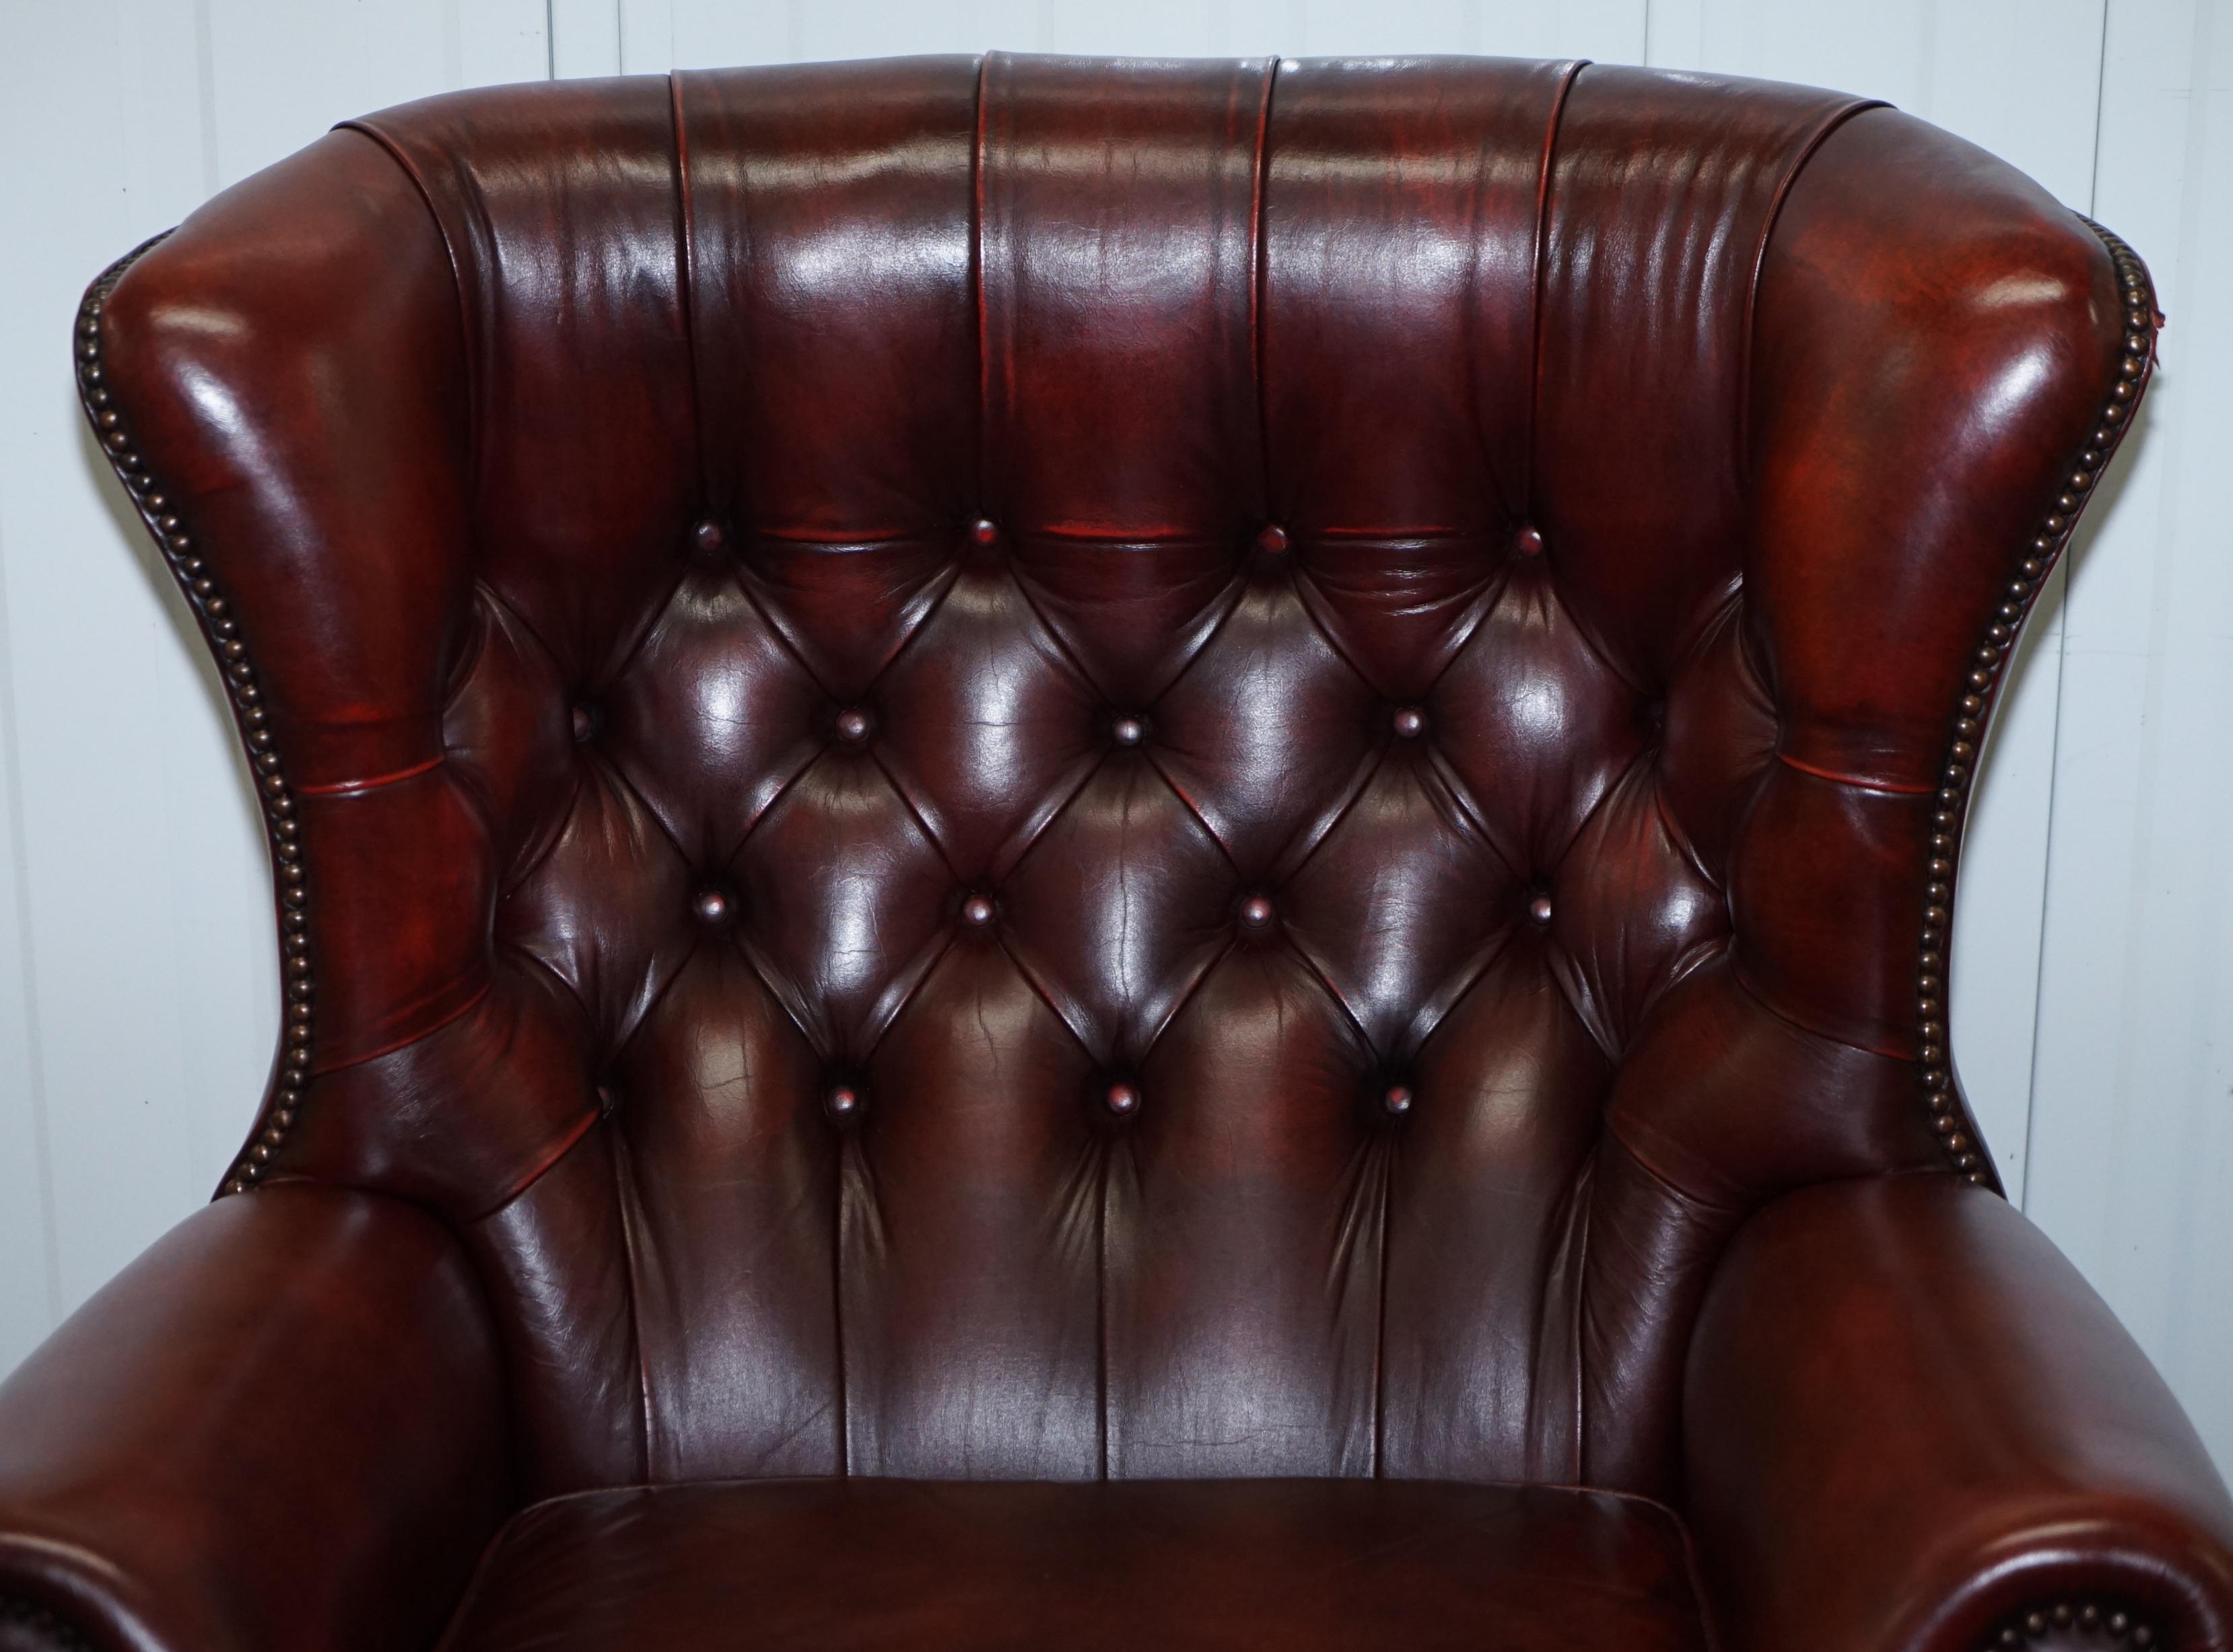 leather library chair and ottoman